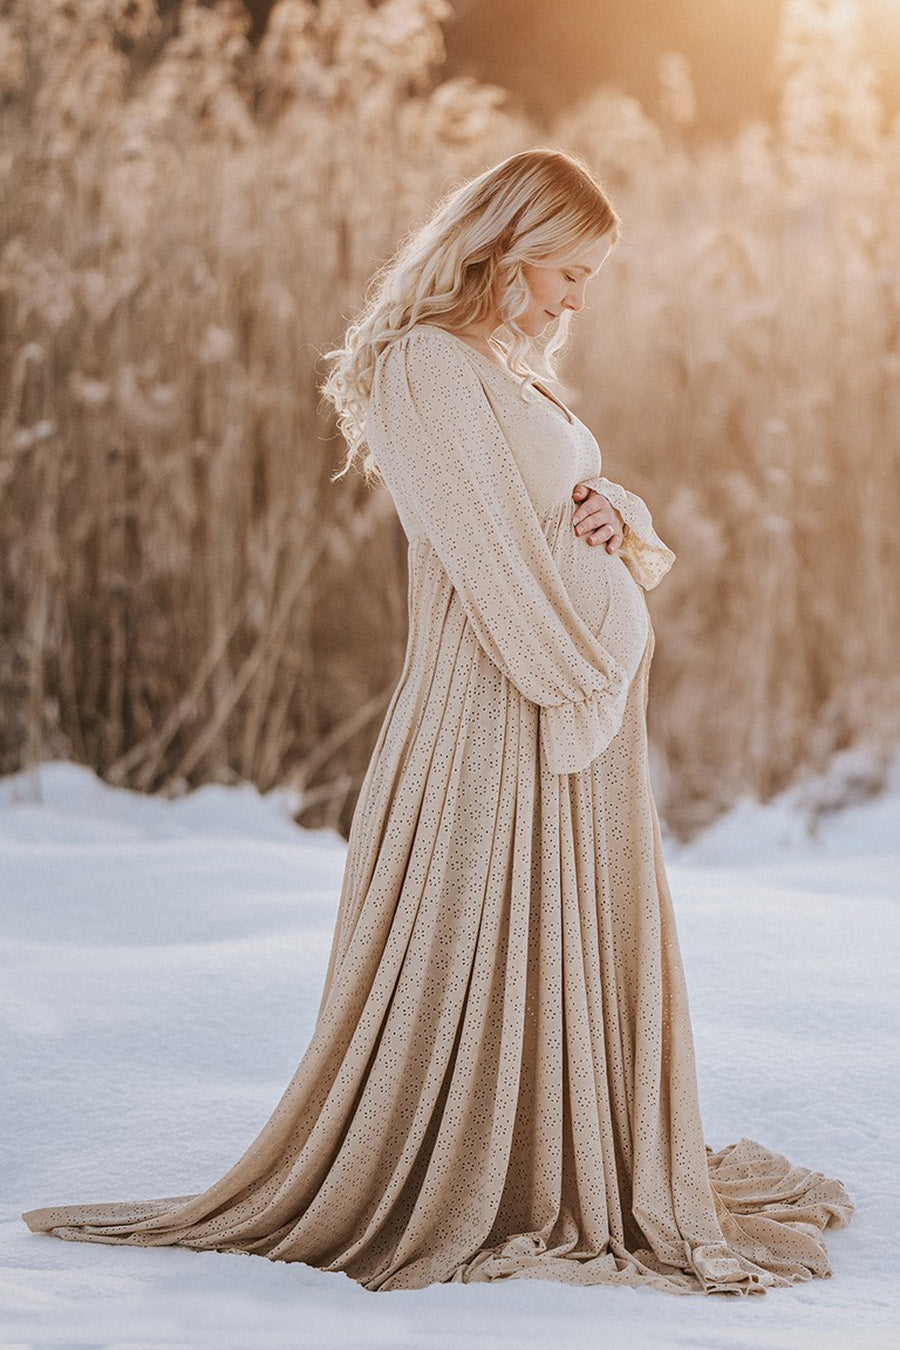 blond pregnant model poses outdoors in the snow wearing a long dress in sand color made of brocante jersey. the dress has poet long sleeves and enough fabric to cover the feet.